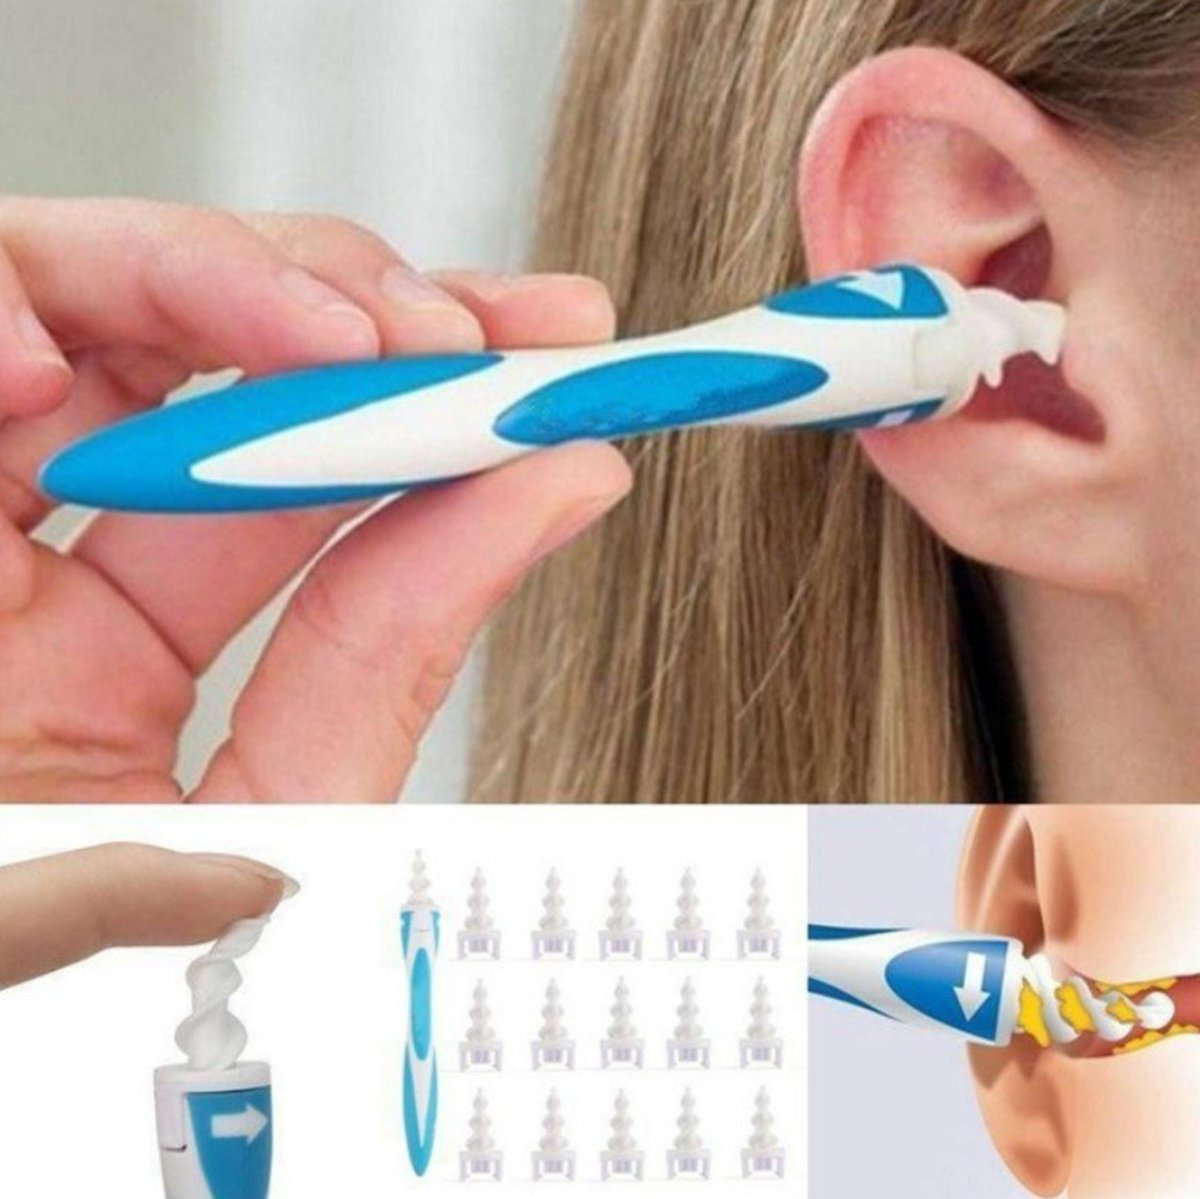 Manual Powerful Ear Cleaner Find Back Spiral Ear Cleaning Stick Skin Cleansing Cotton Swab